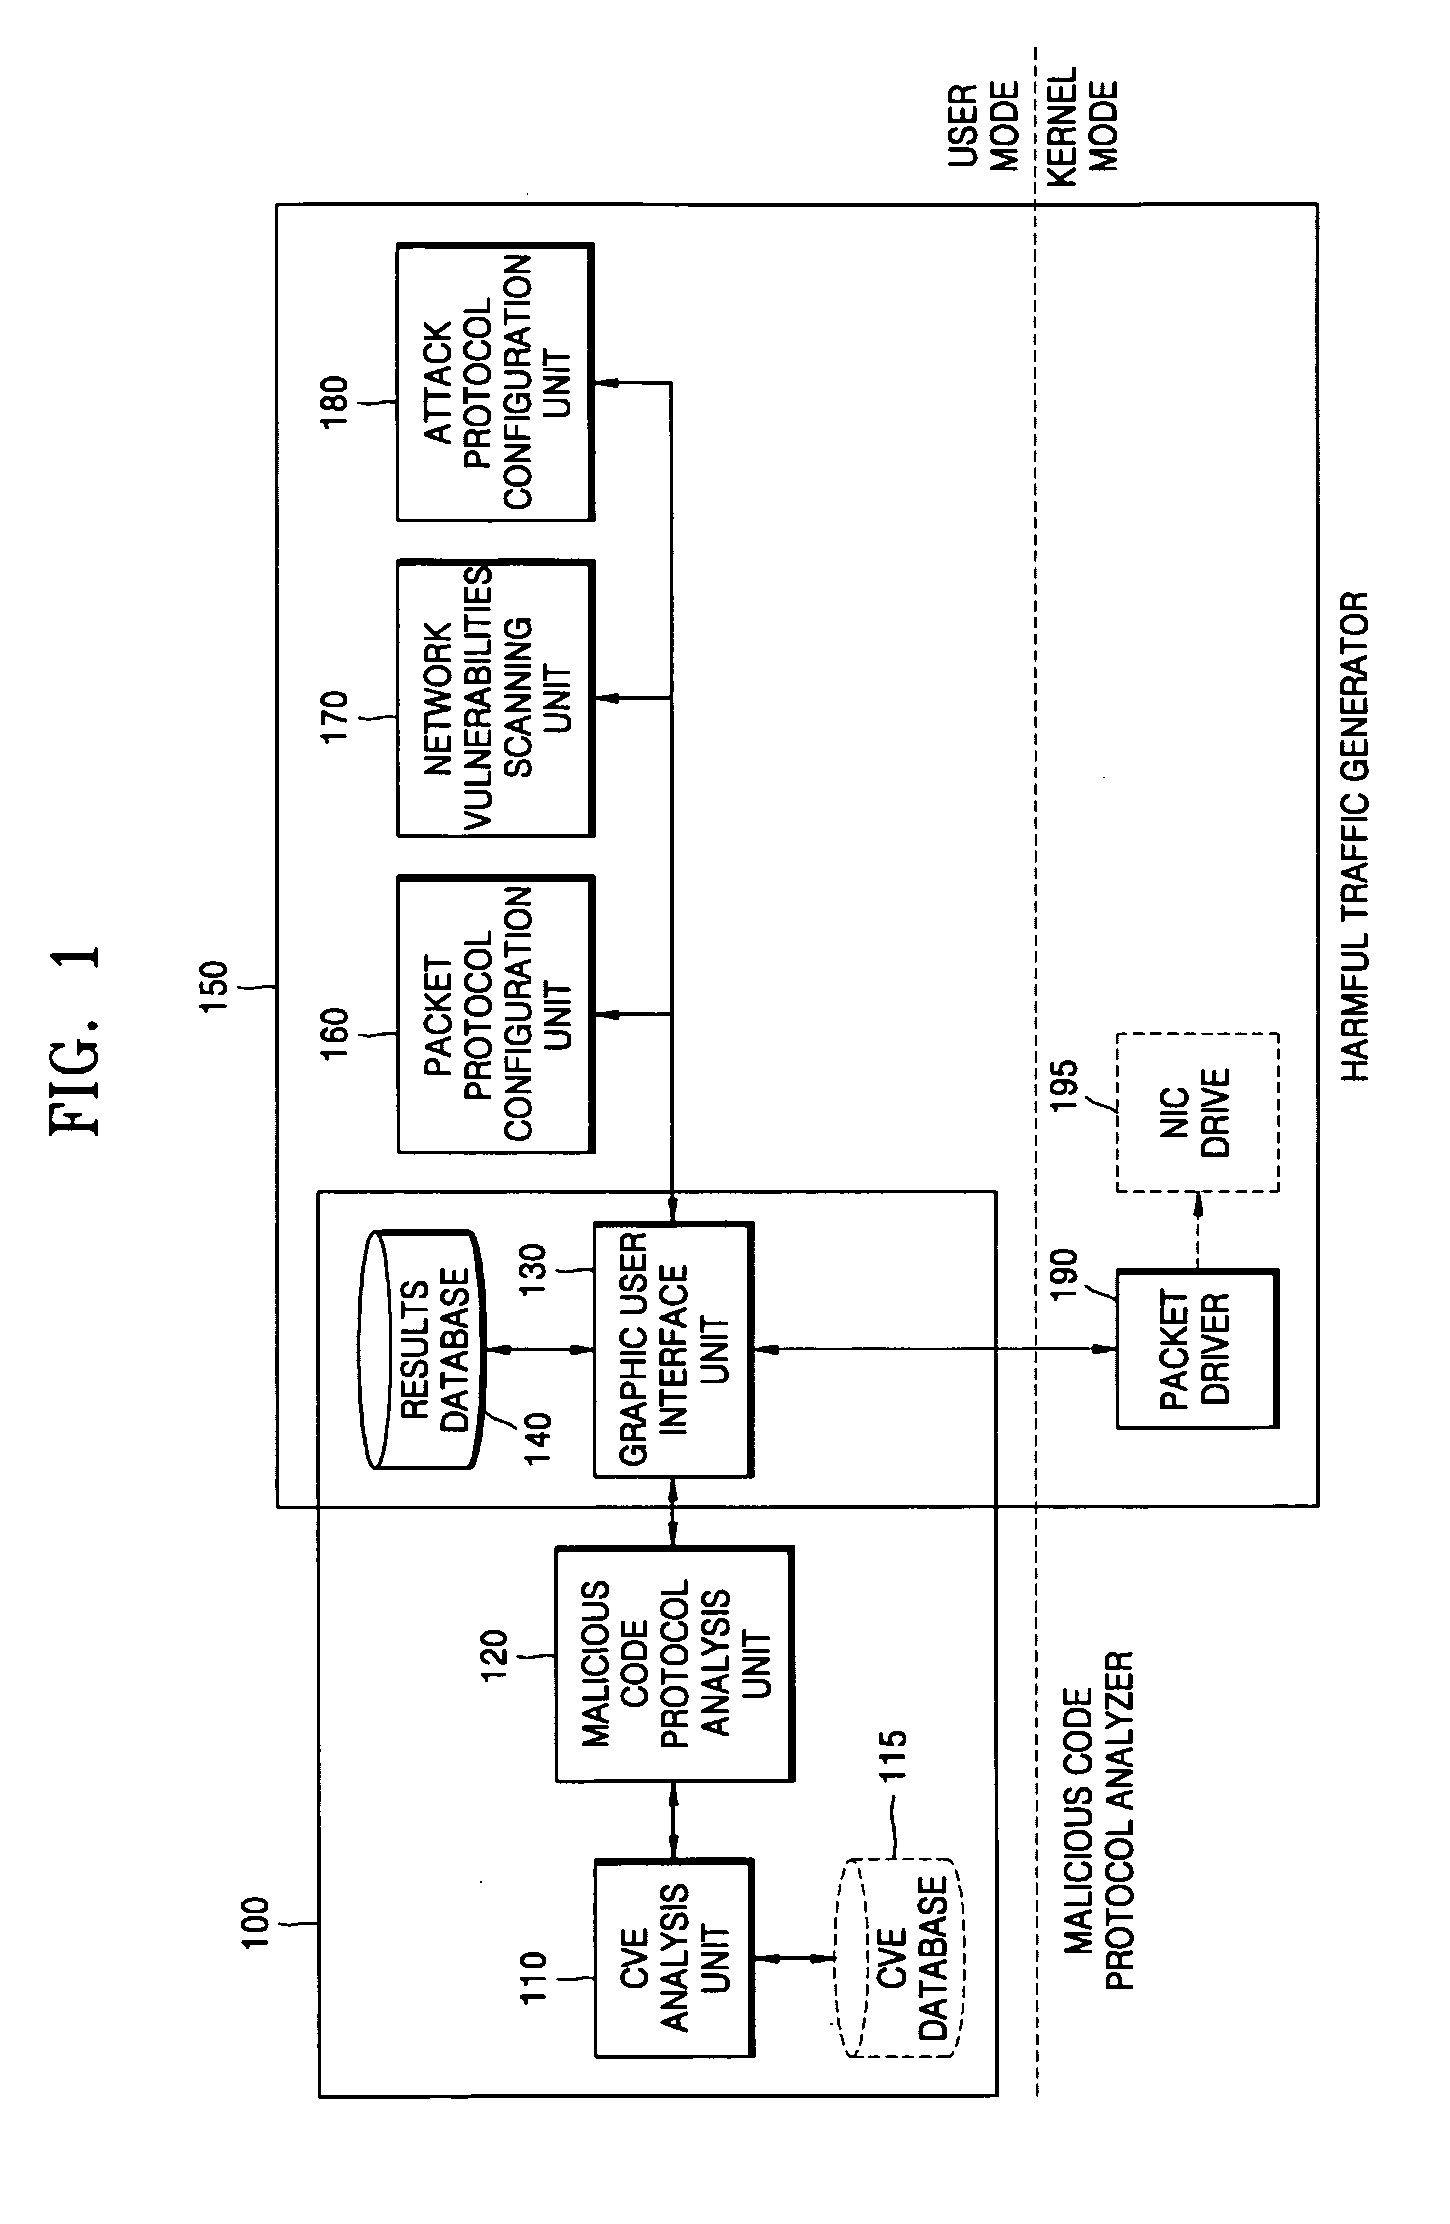 System and method for analyzing malicious code protocol and generating harmful traffic